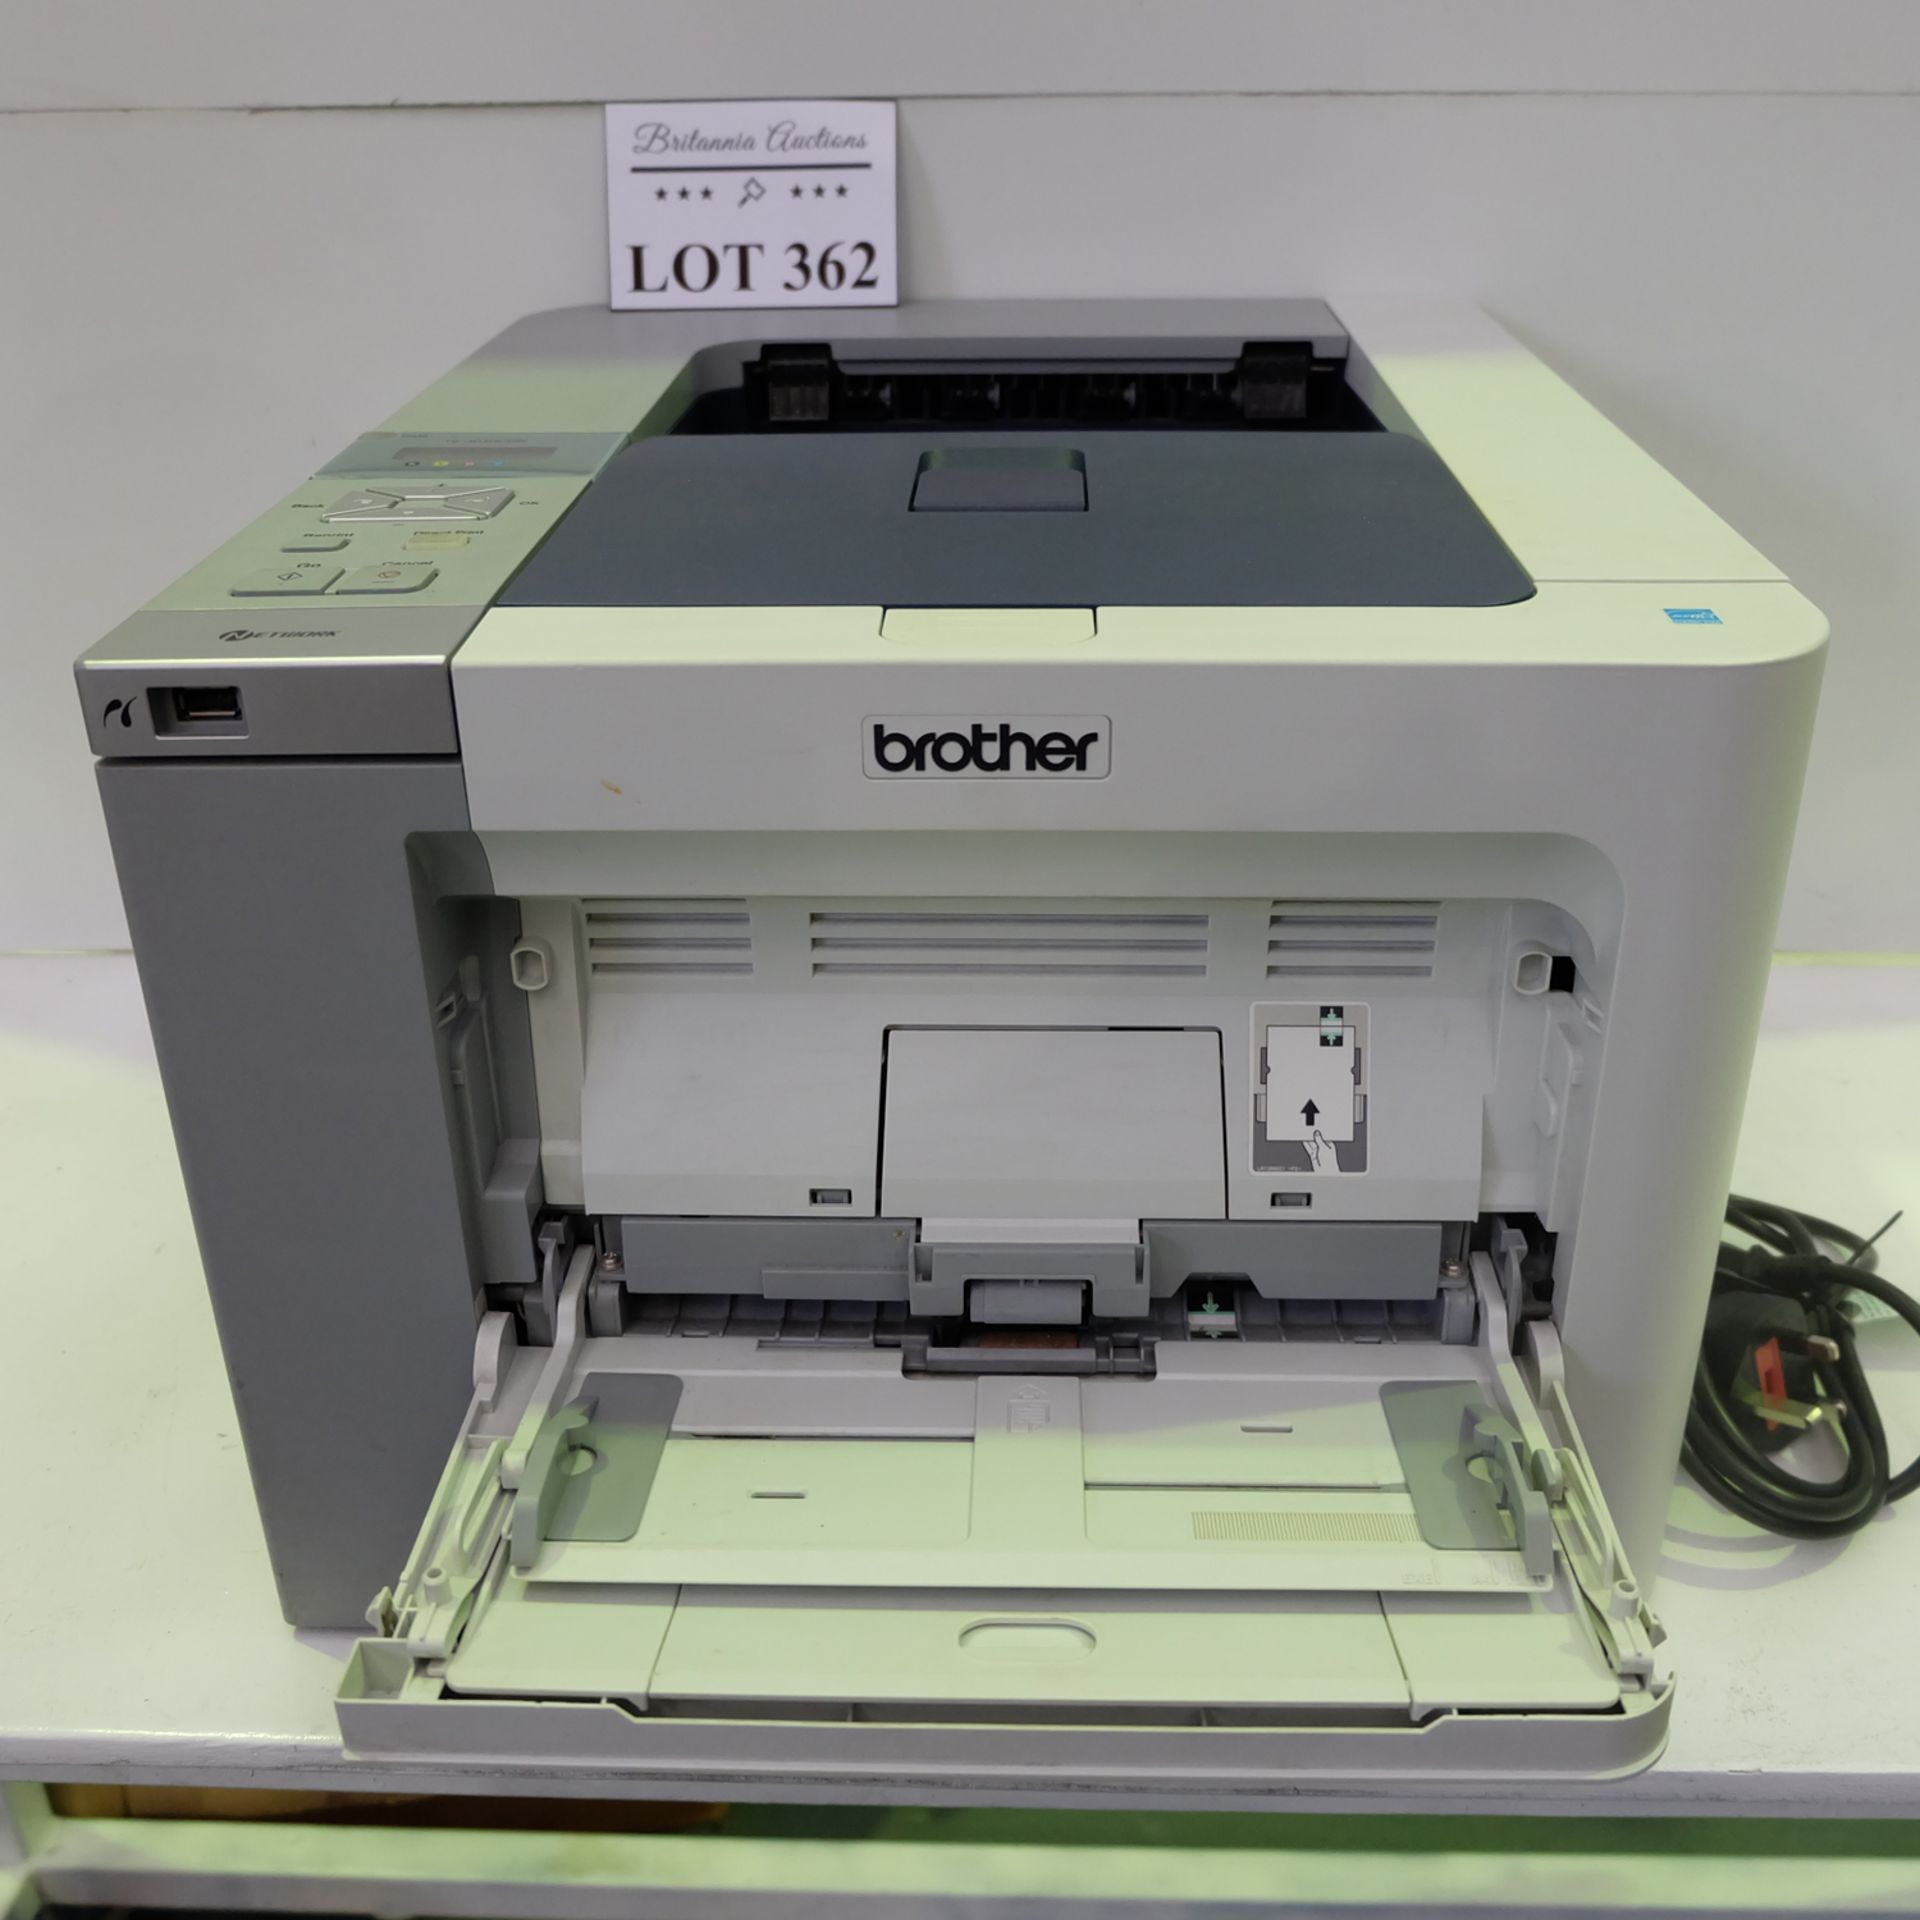 Brother Model HL-4050CDN Colour Laser Printer with 3 x Cartridges. - Image 5 of 7